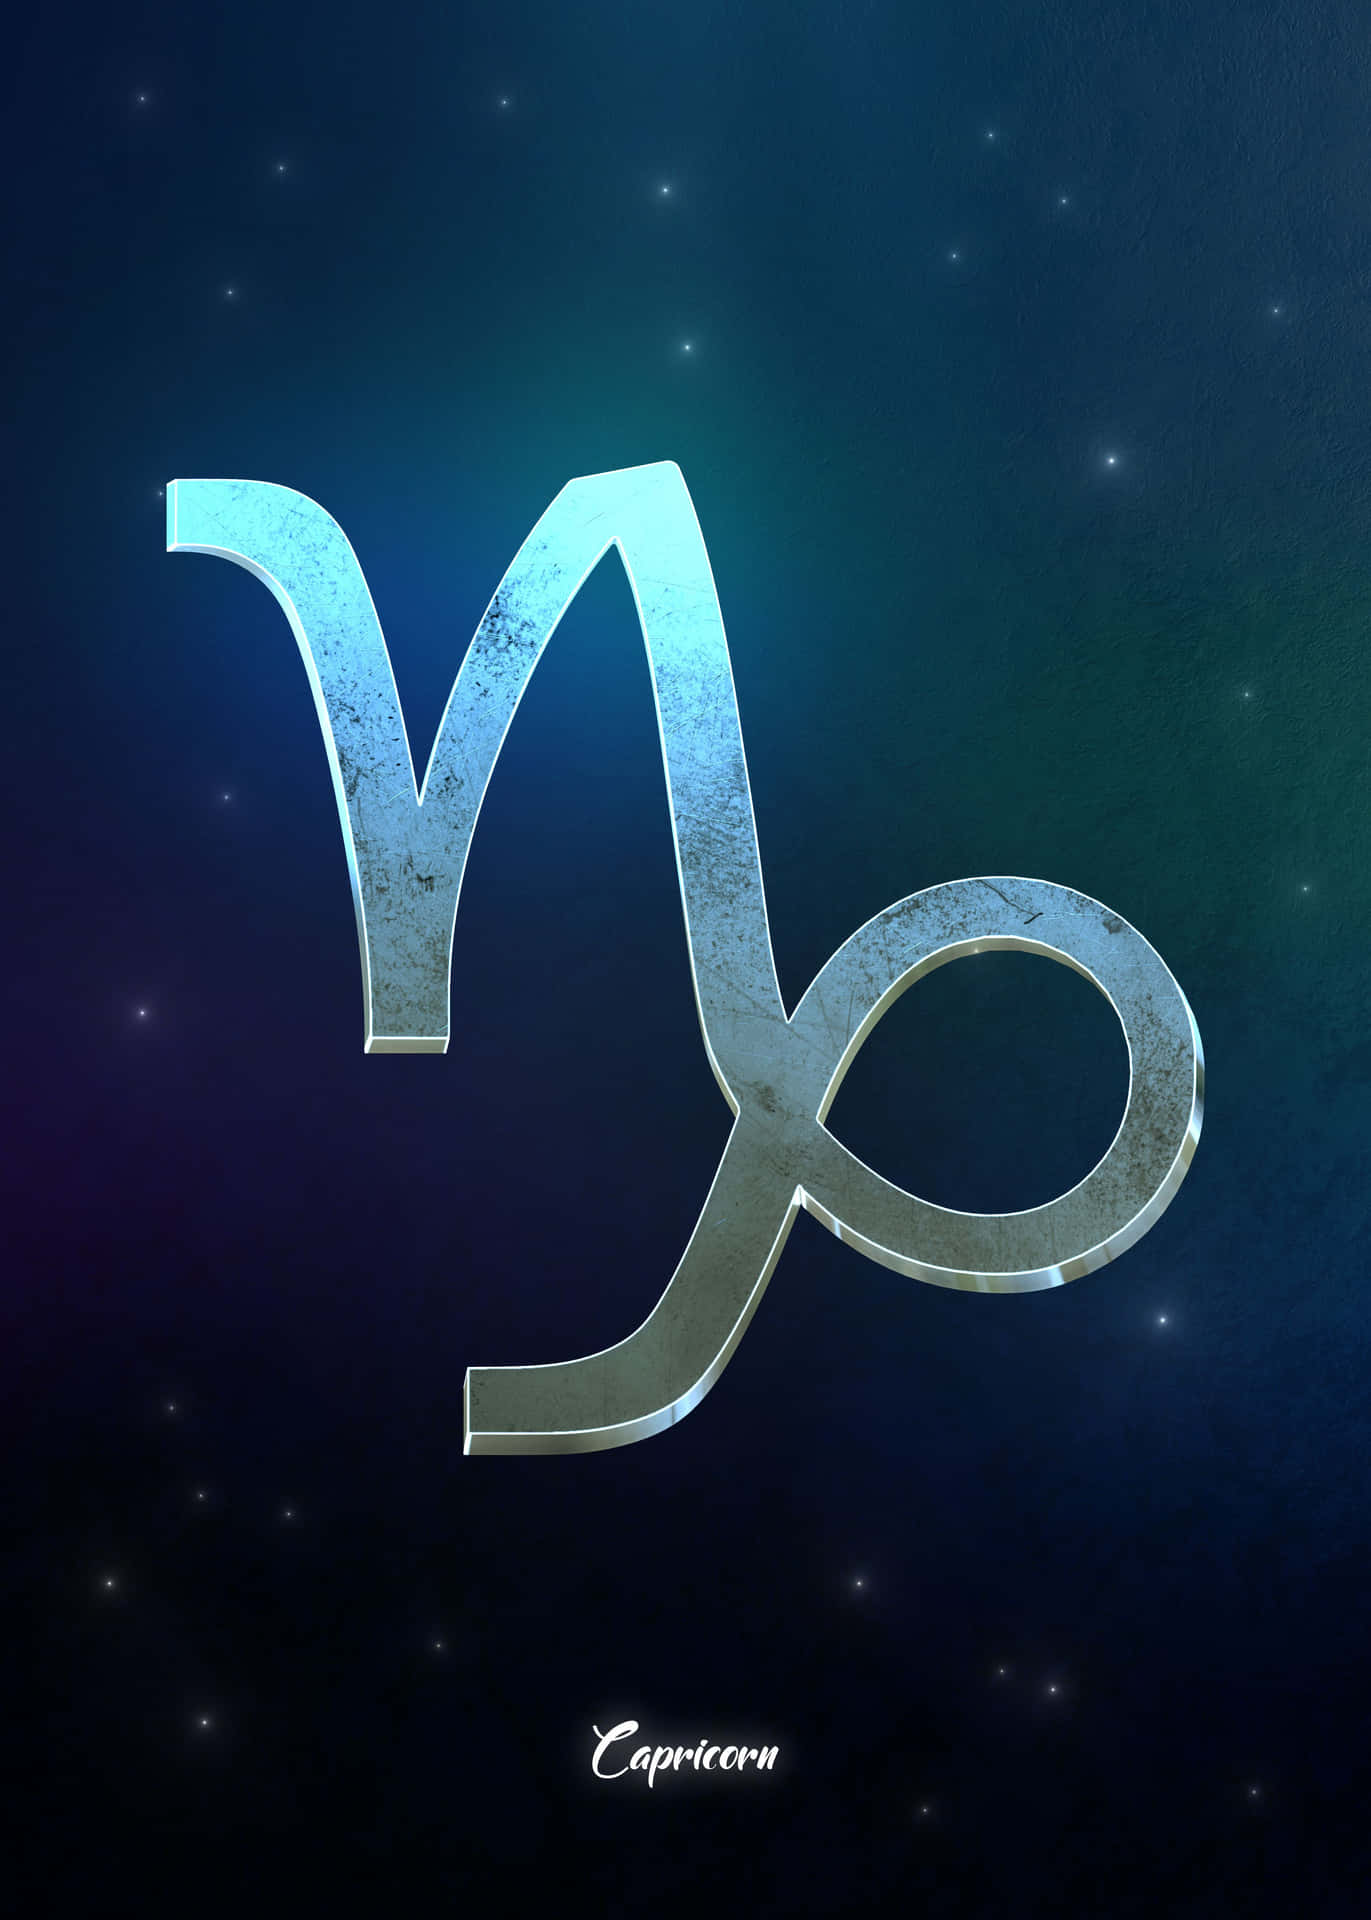 Capricorn Astrological Sign under the Night Sky